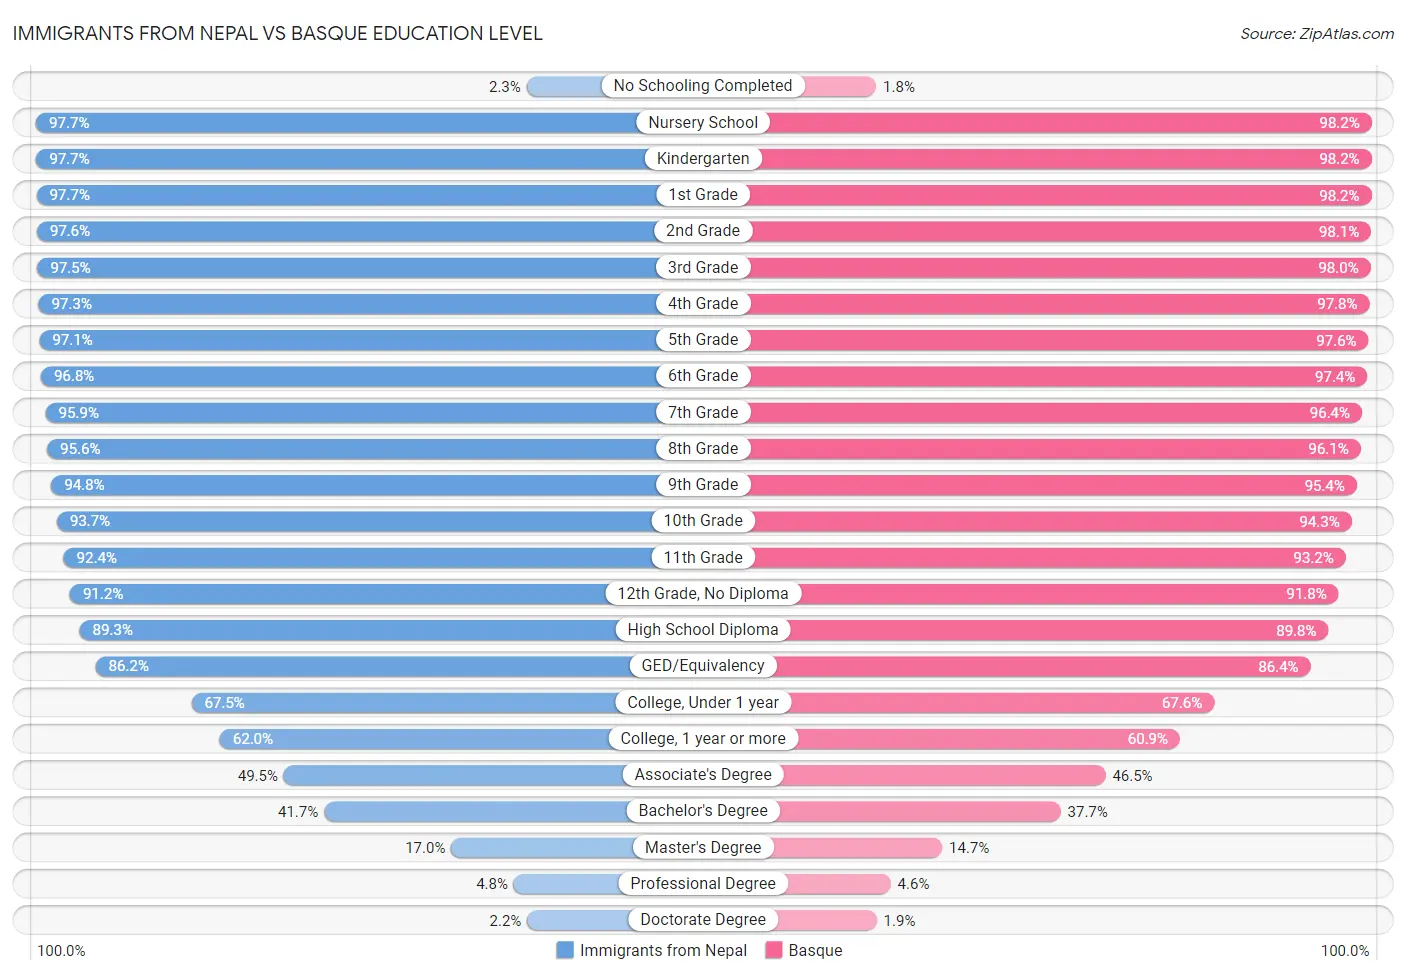 Immigrants from Nepal vs Basque Education Level